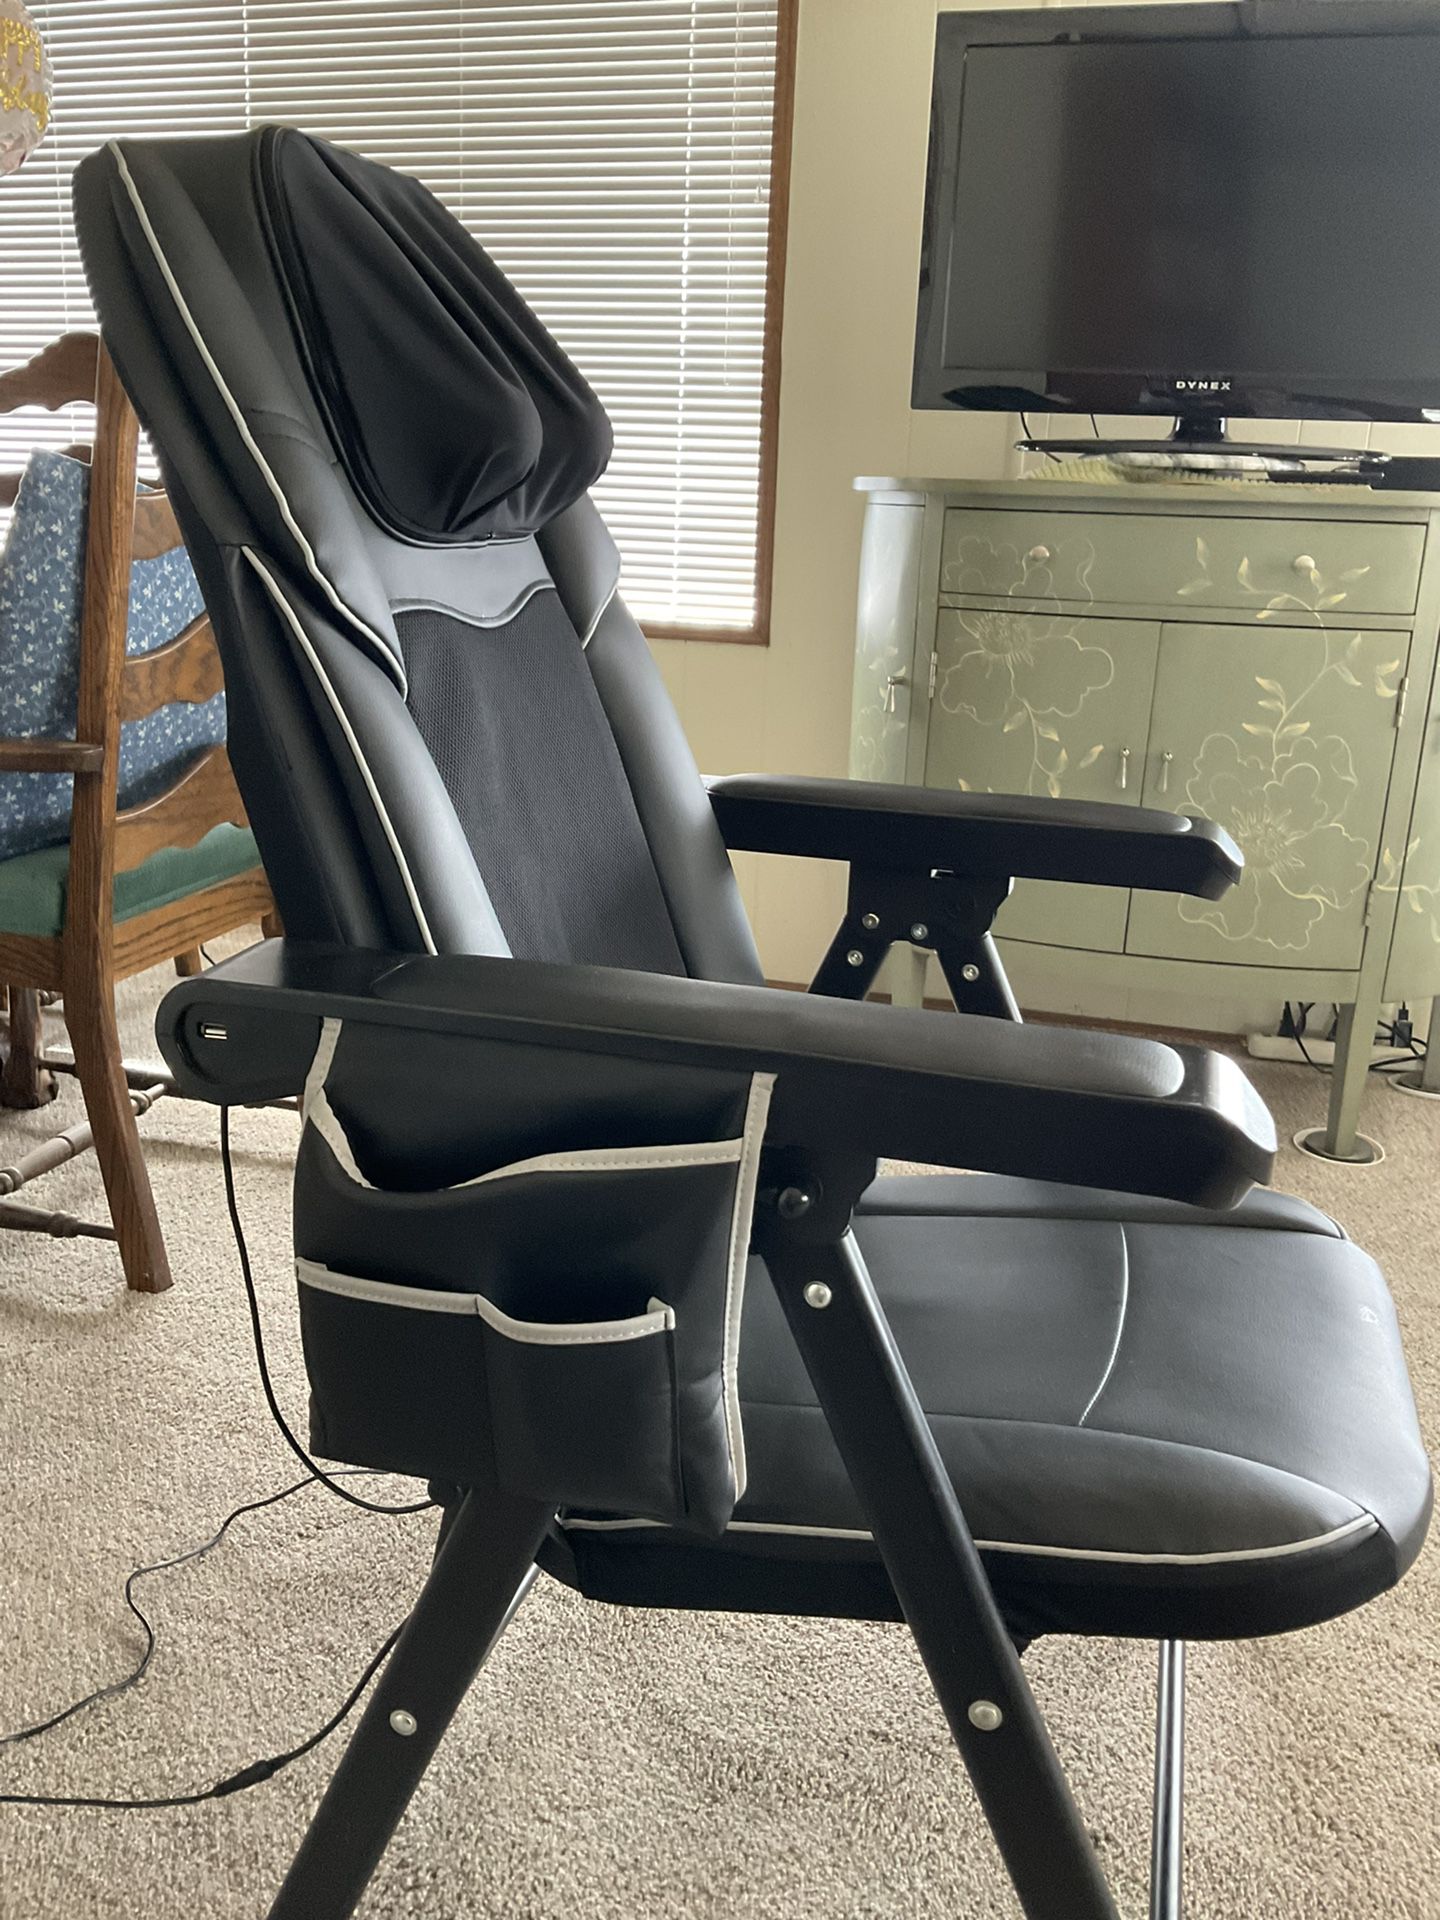 Massage Chair, Sturdy & Strong, Like New, Works Good